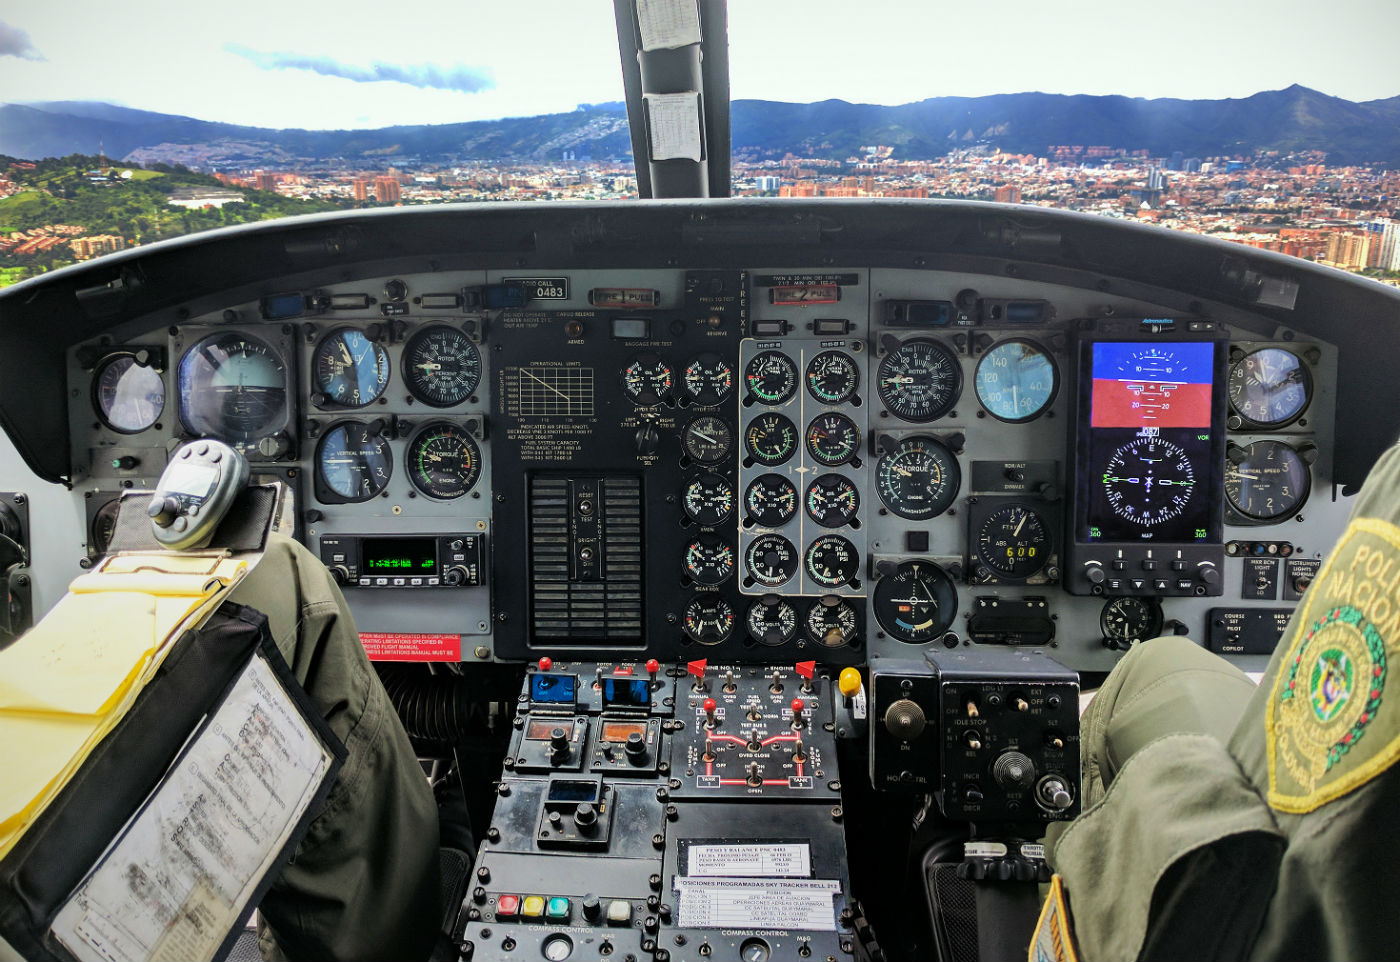 The Astronautics RoadRunner EFI onboard a Bell 212 helicopter as it flew on a demonstration flight with the Colombian National Police. The new RoadRunner EFI offers operators an easy, drop-in replacement for ADI and HSI primary flight instruments in legacy helicopters that enhances safety, reduces maintenance and replacement costs, and lowers installation downtime. Astronautics Photo